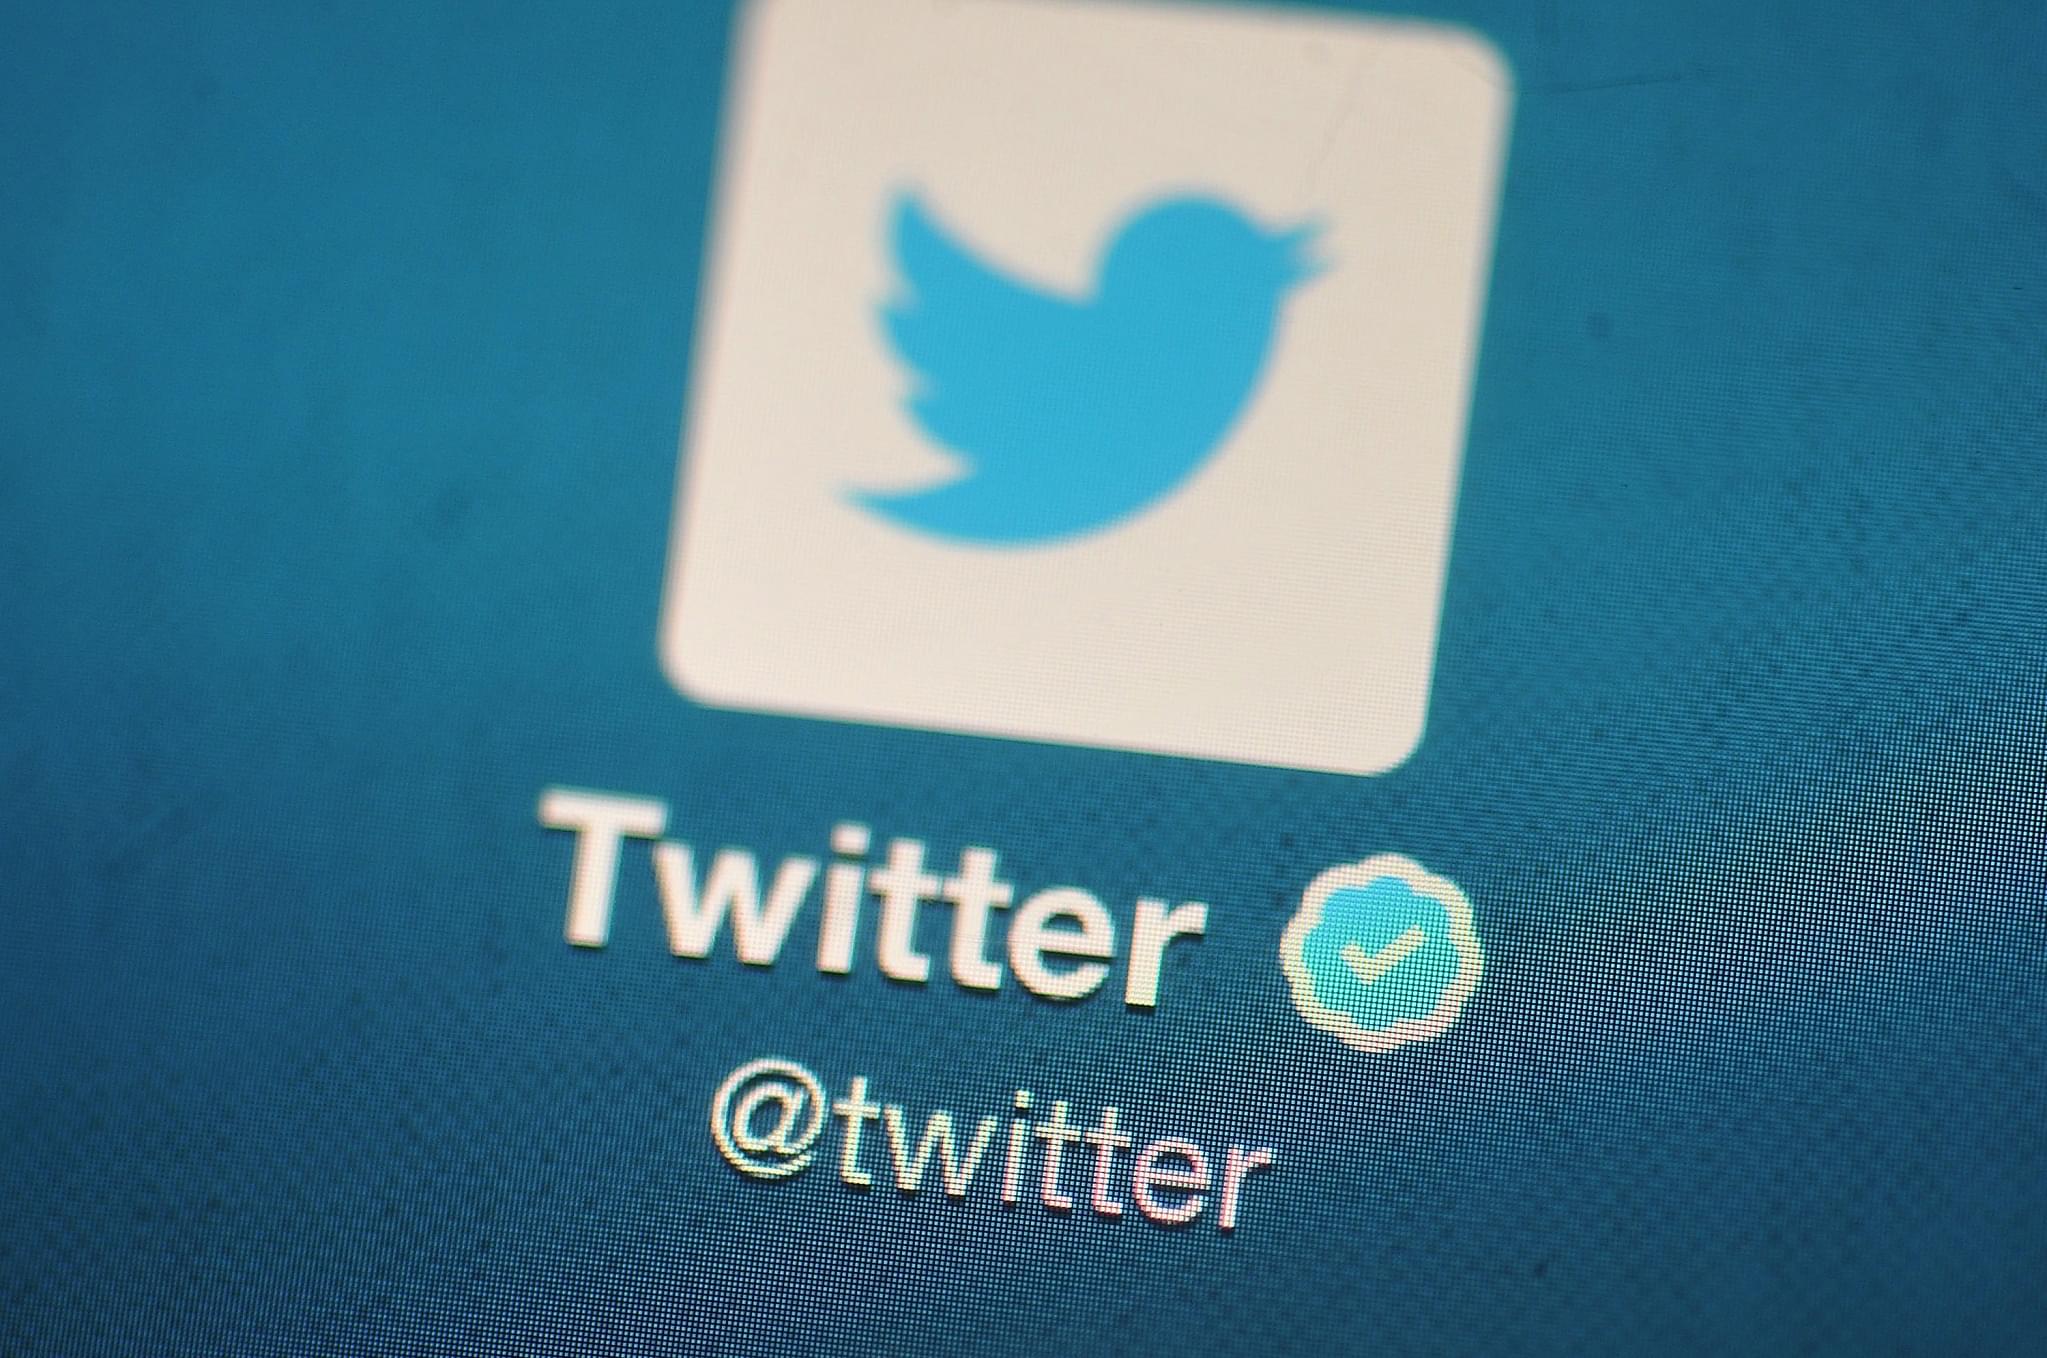 The Twitter logo is displayed on a mobile device. Photo credit: Bethany Clarke/Getty Images